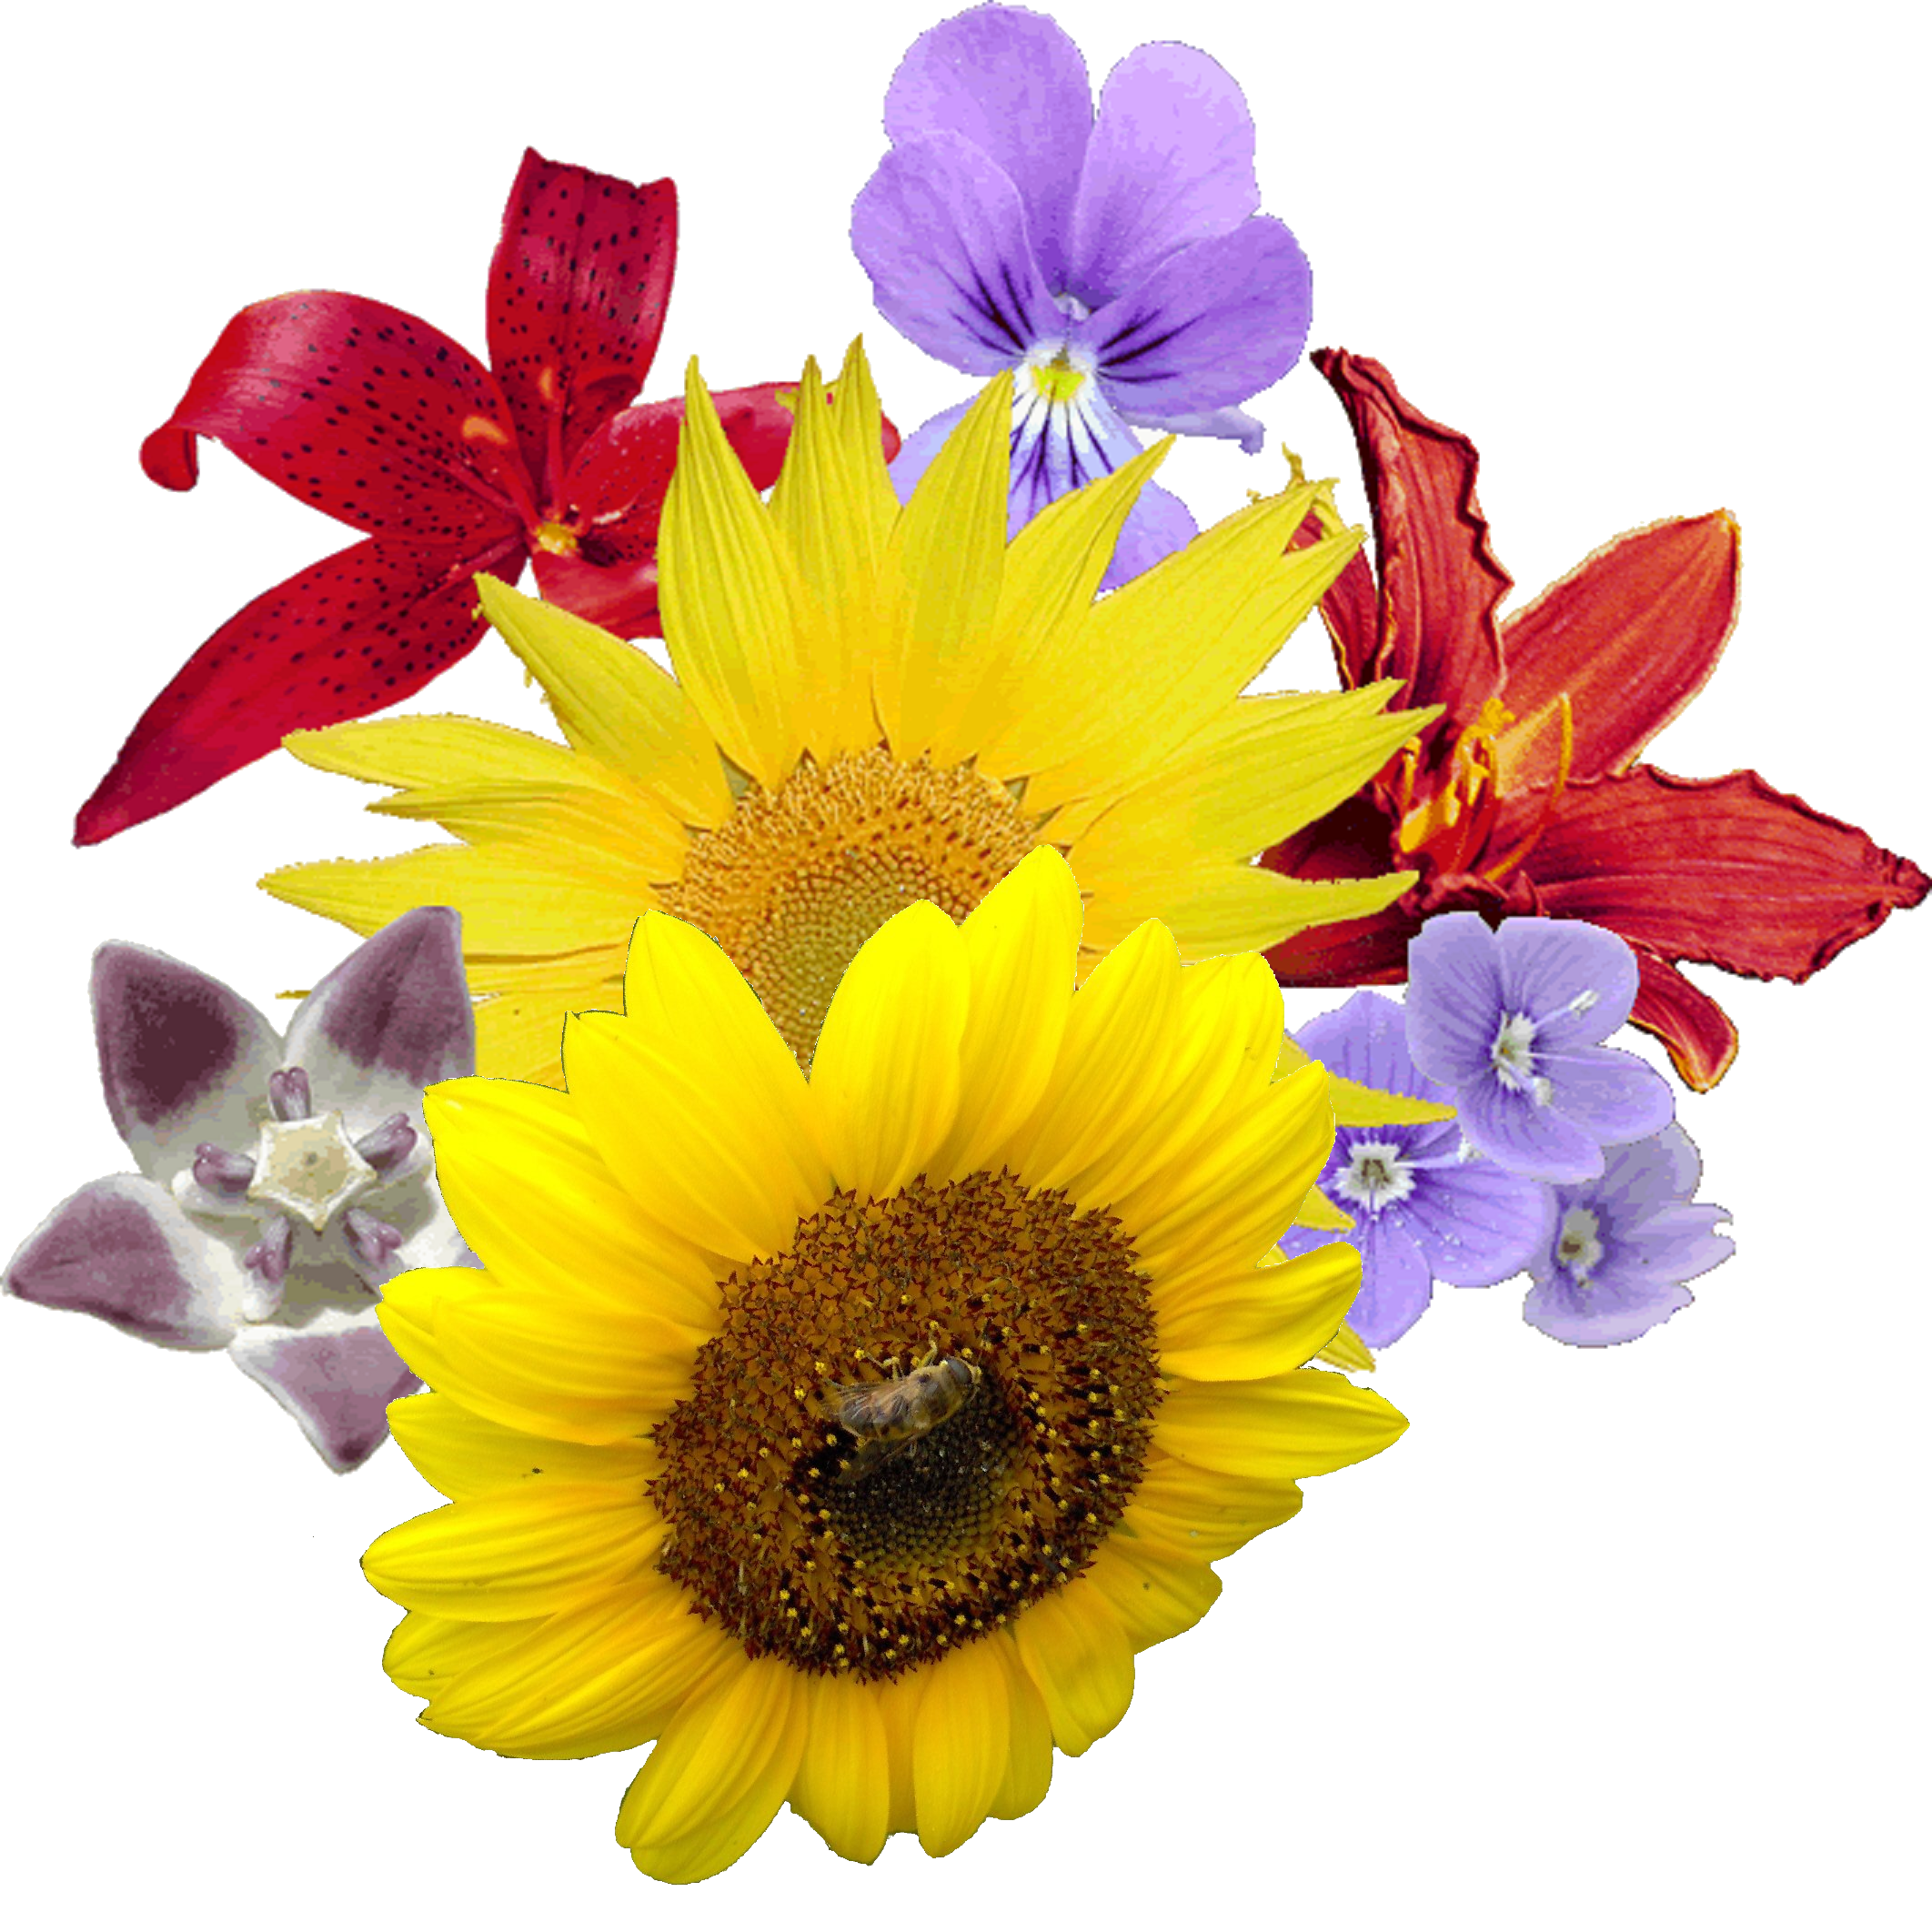 Download Download Yellow Flowers Bouquet Image Hq Png Image Freepngimg Yellowimages Mockups